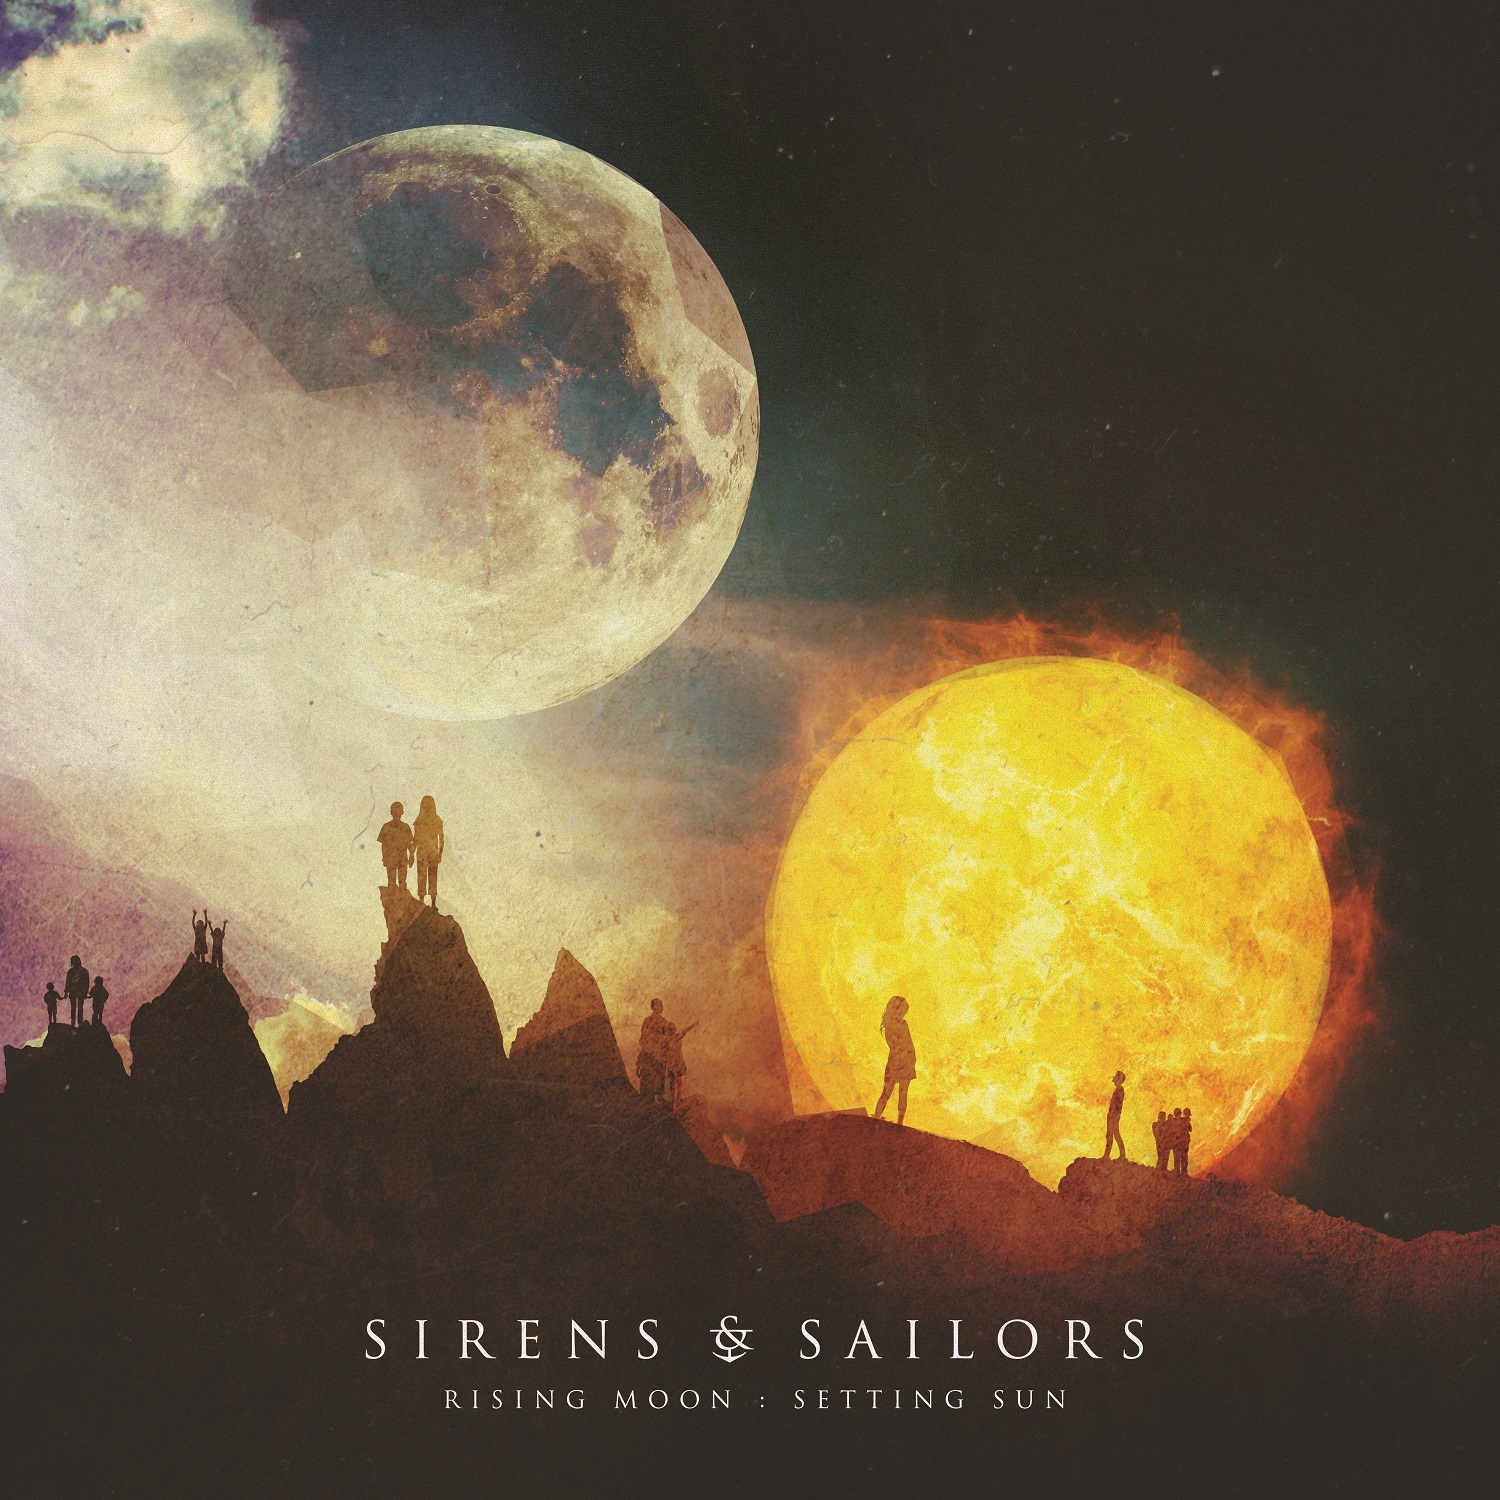 Sirens & Sailors - Chorus Of The Dead (New Song) (2015)